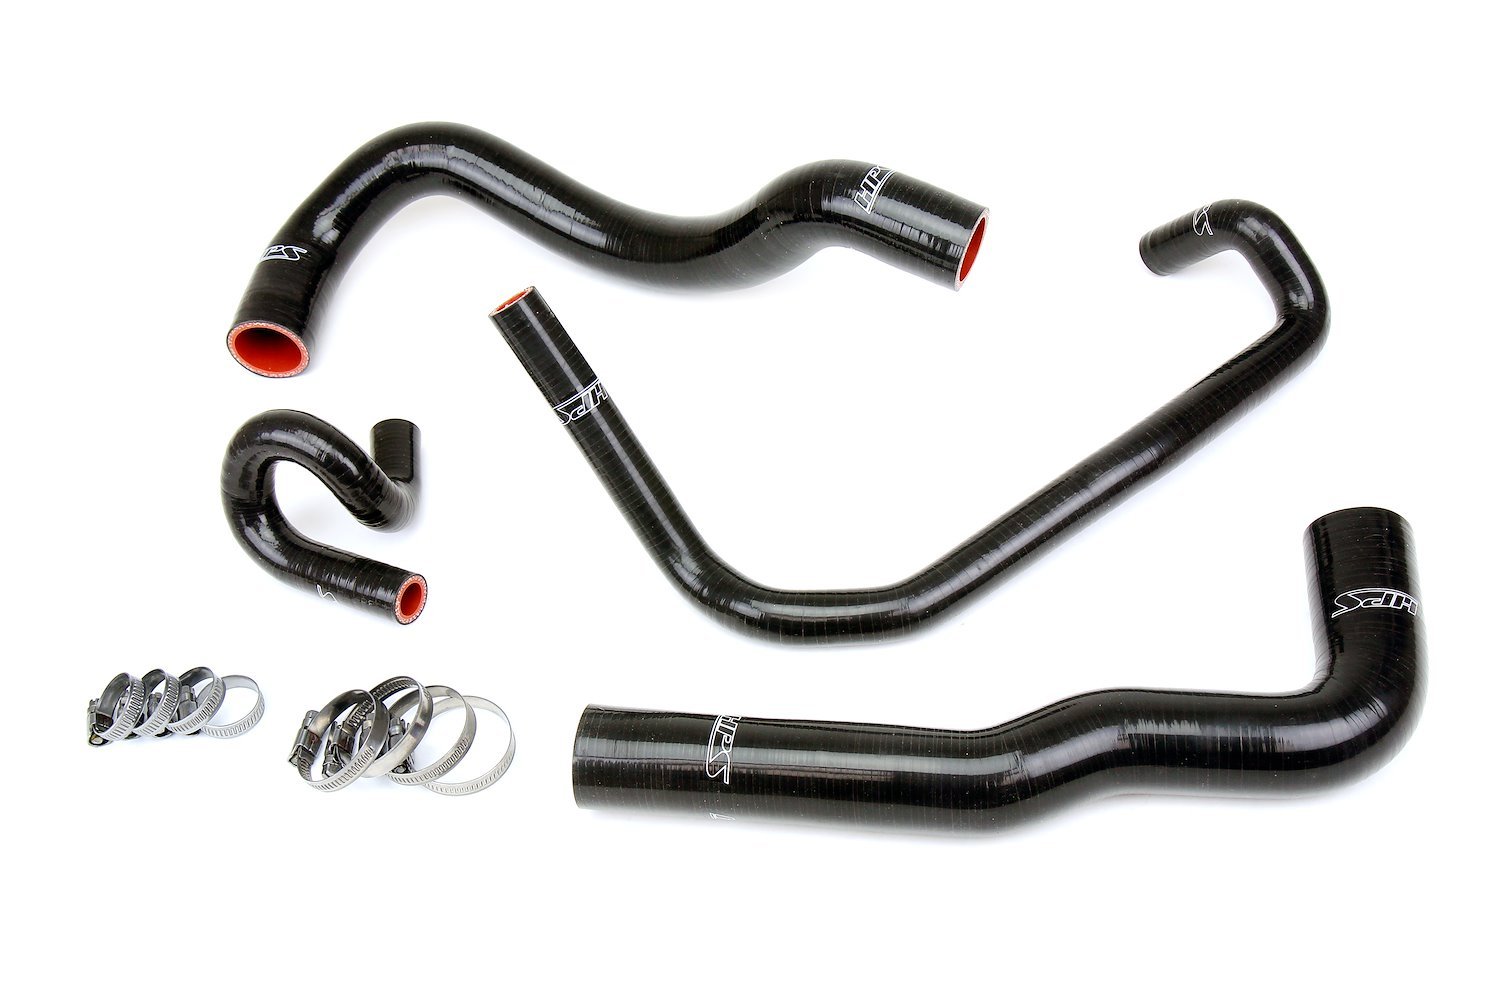 57-1960-BLK Radiator and Heater Hose Kit, 3-Ply Reinforced Silicone, Replaces Rubber Radiator & Heater Coolant Hoses